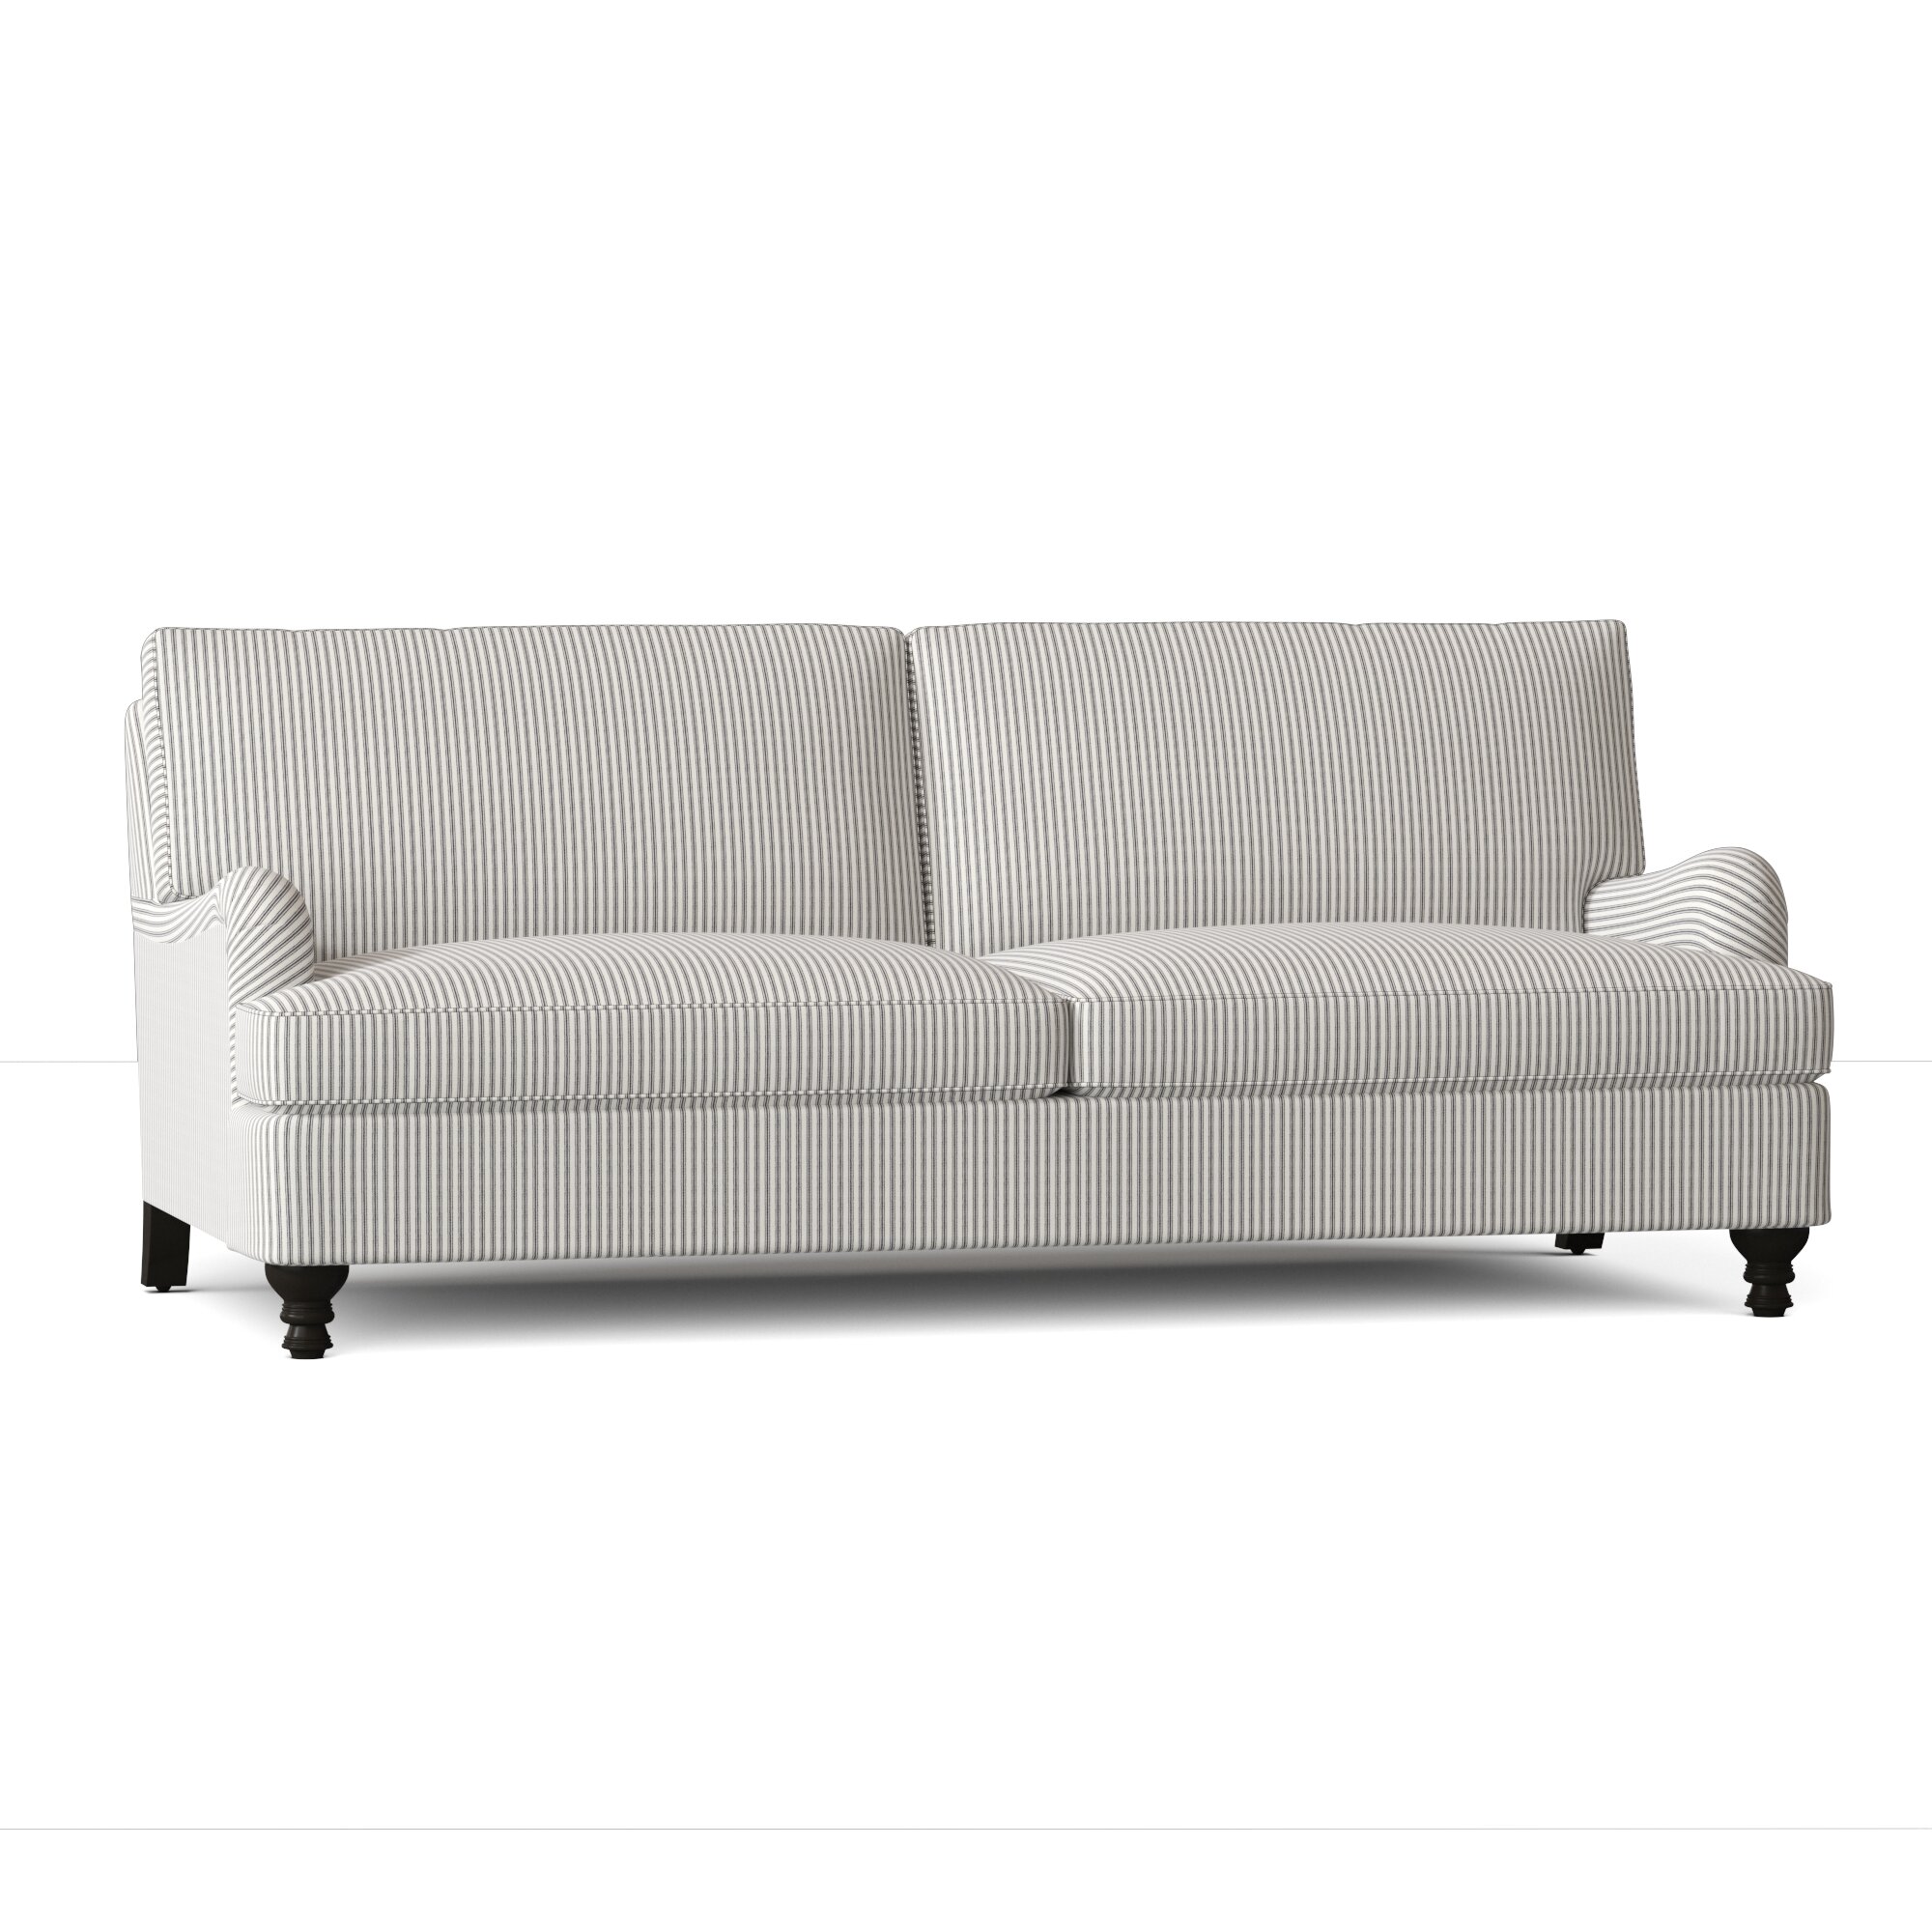 Lincolnwood Slipcovered Sofa Reviews Joss Main,Small Towns In The Usa